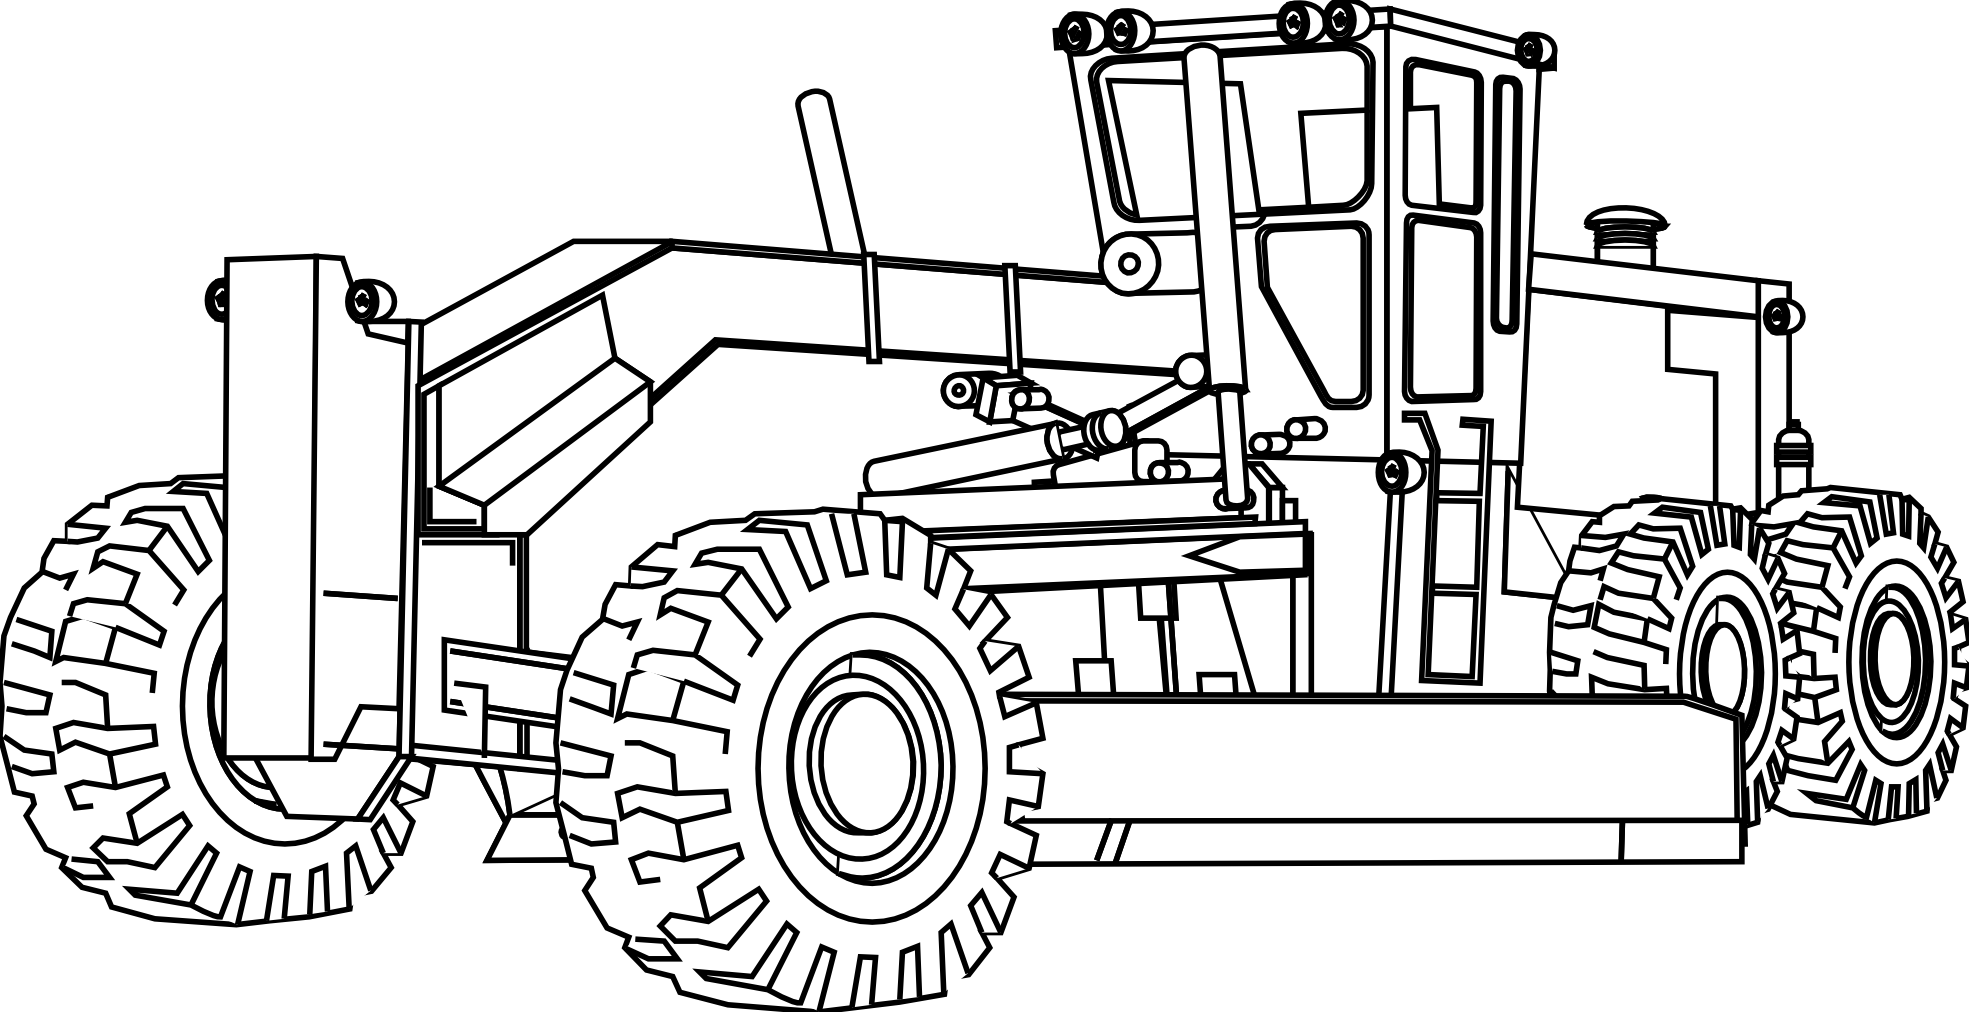 9 Pics of Free Construction Equipment Coloring Pages - Printable ...